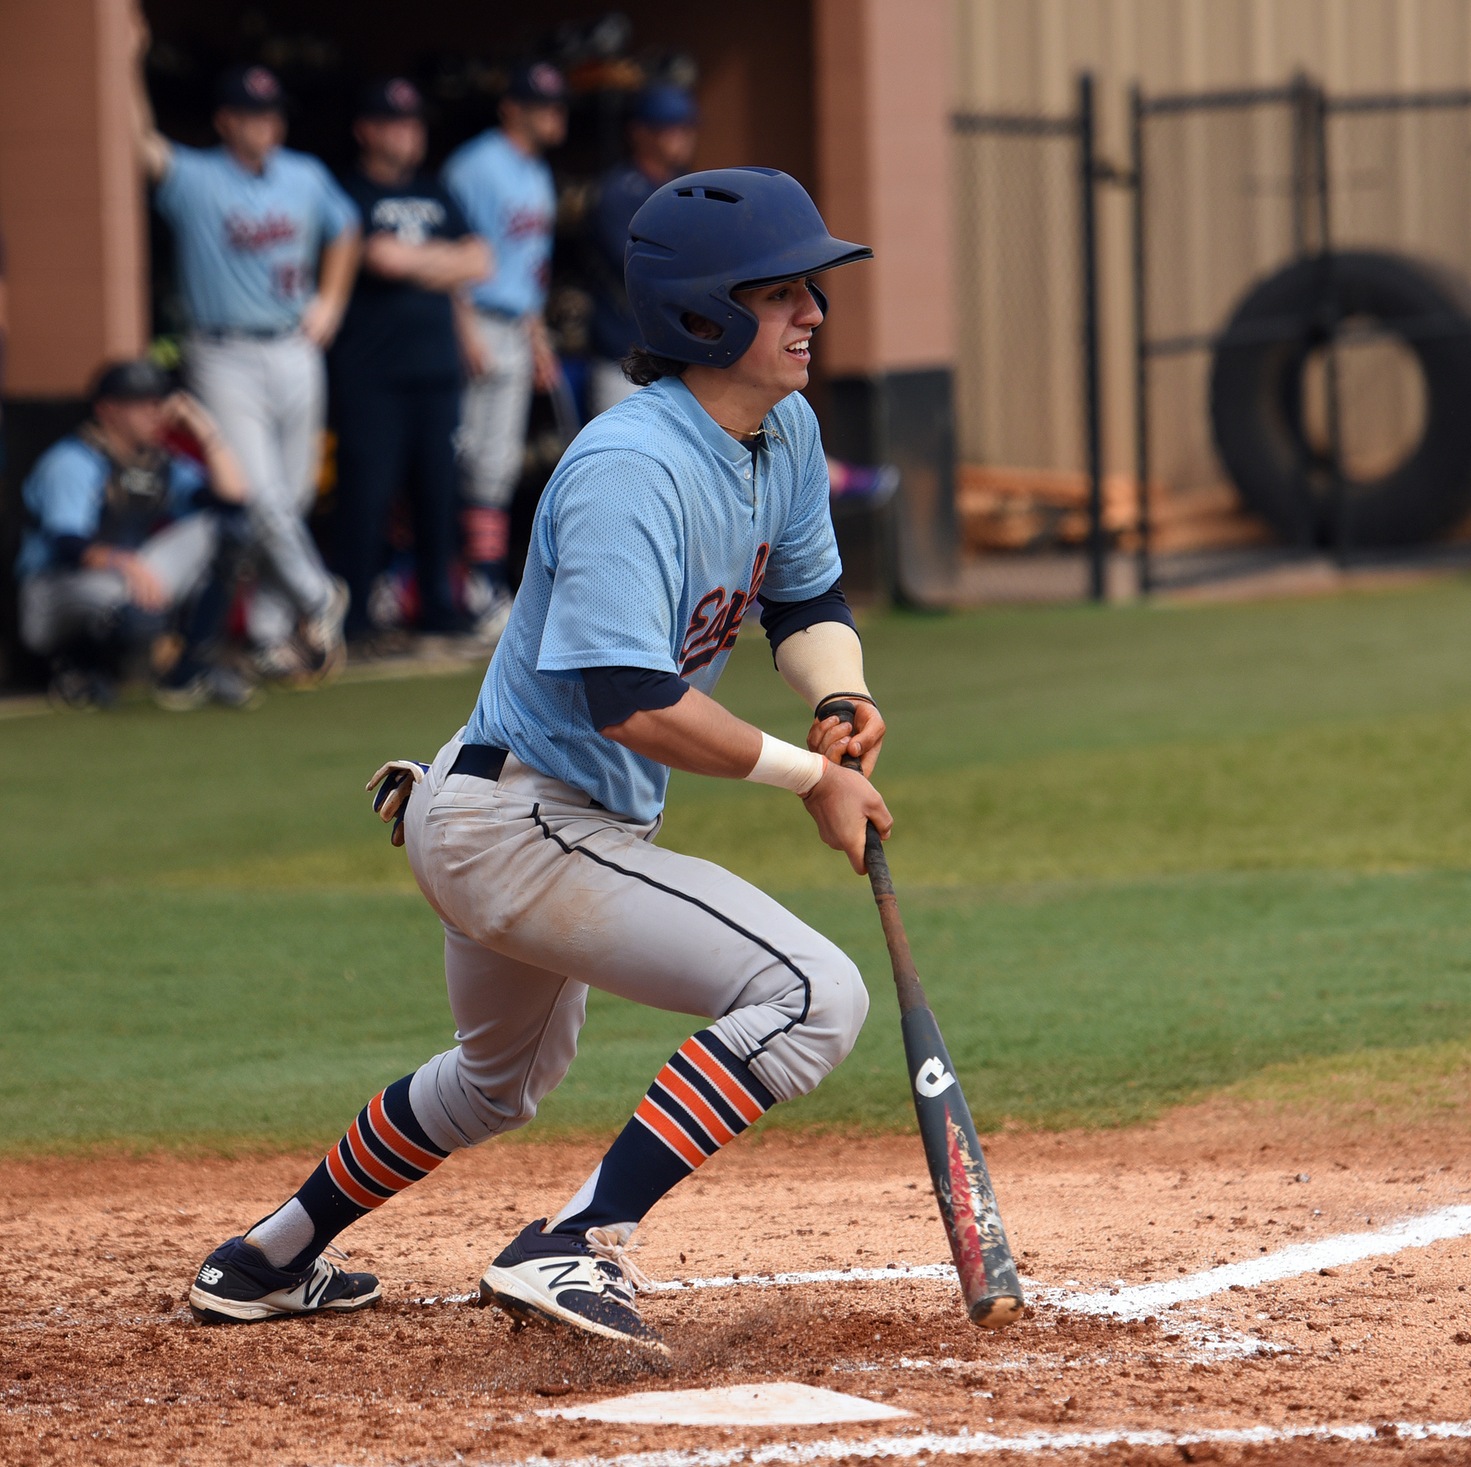 Catawba's bats too much for C-N in doubleheader sweep